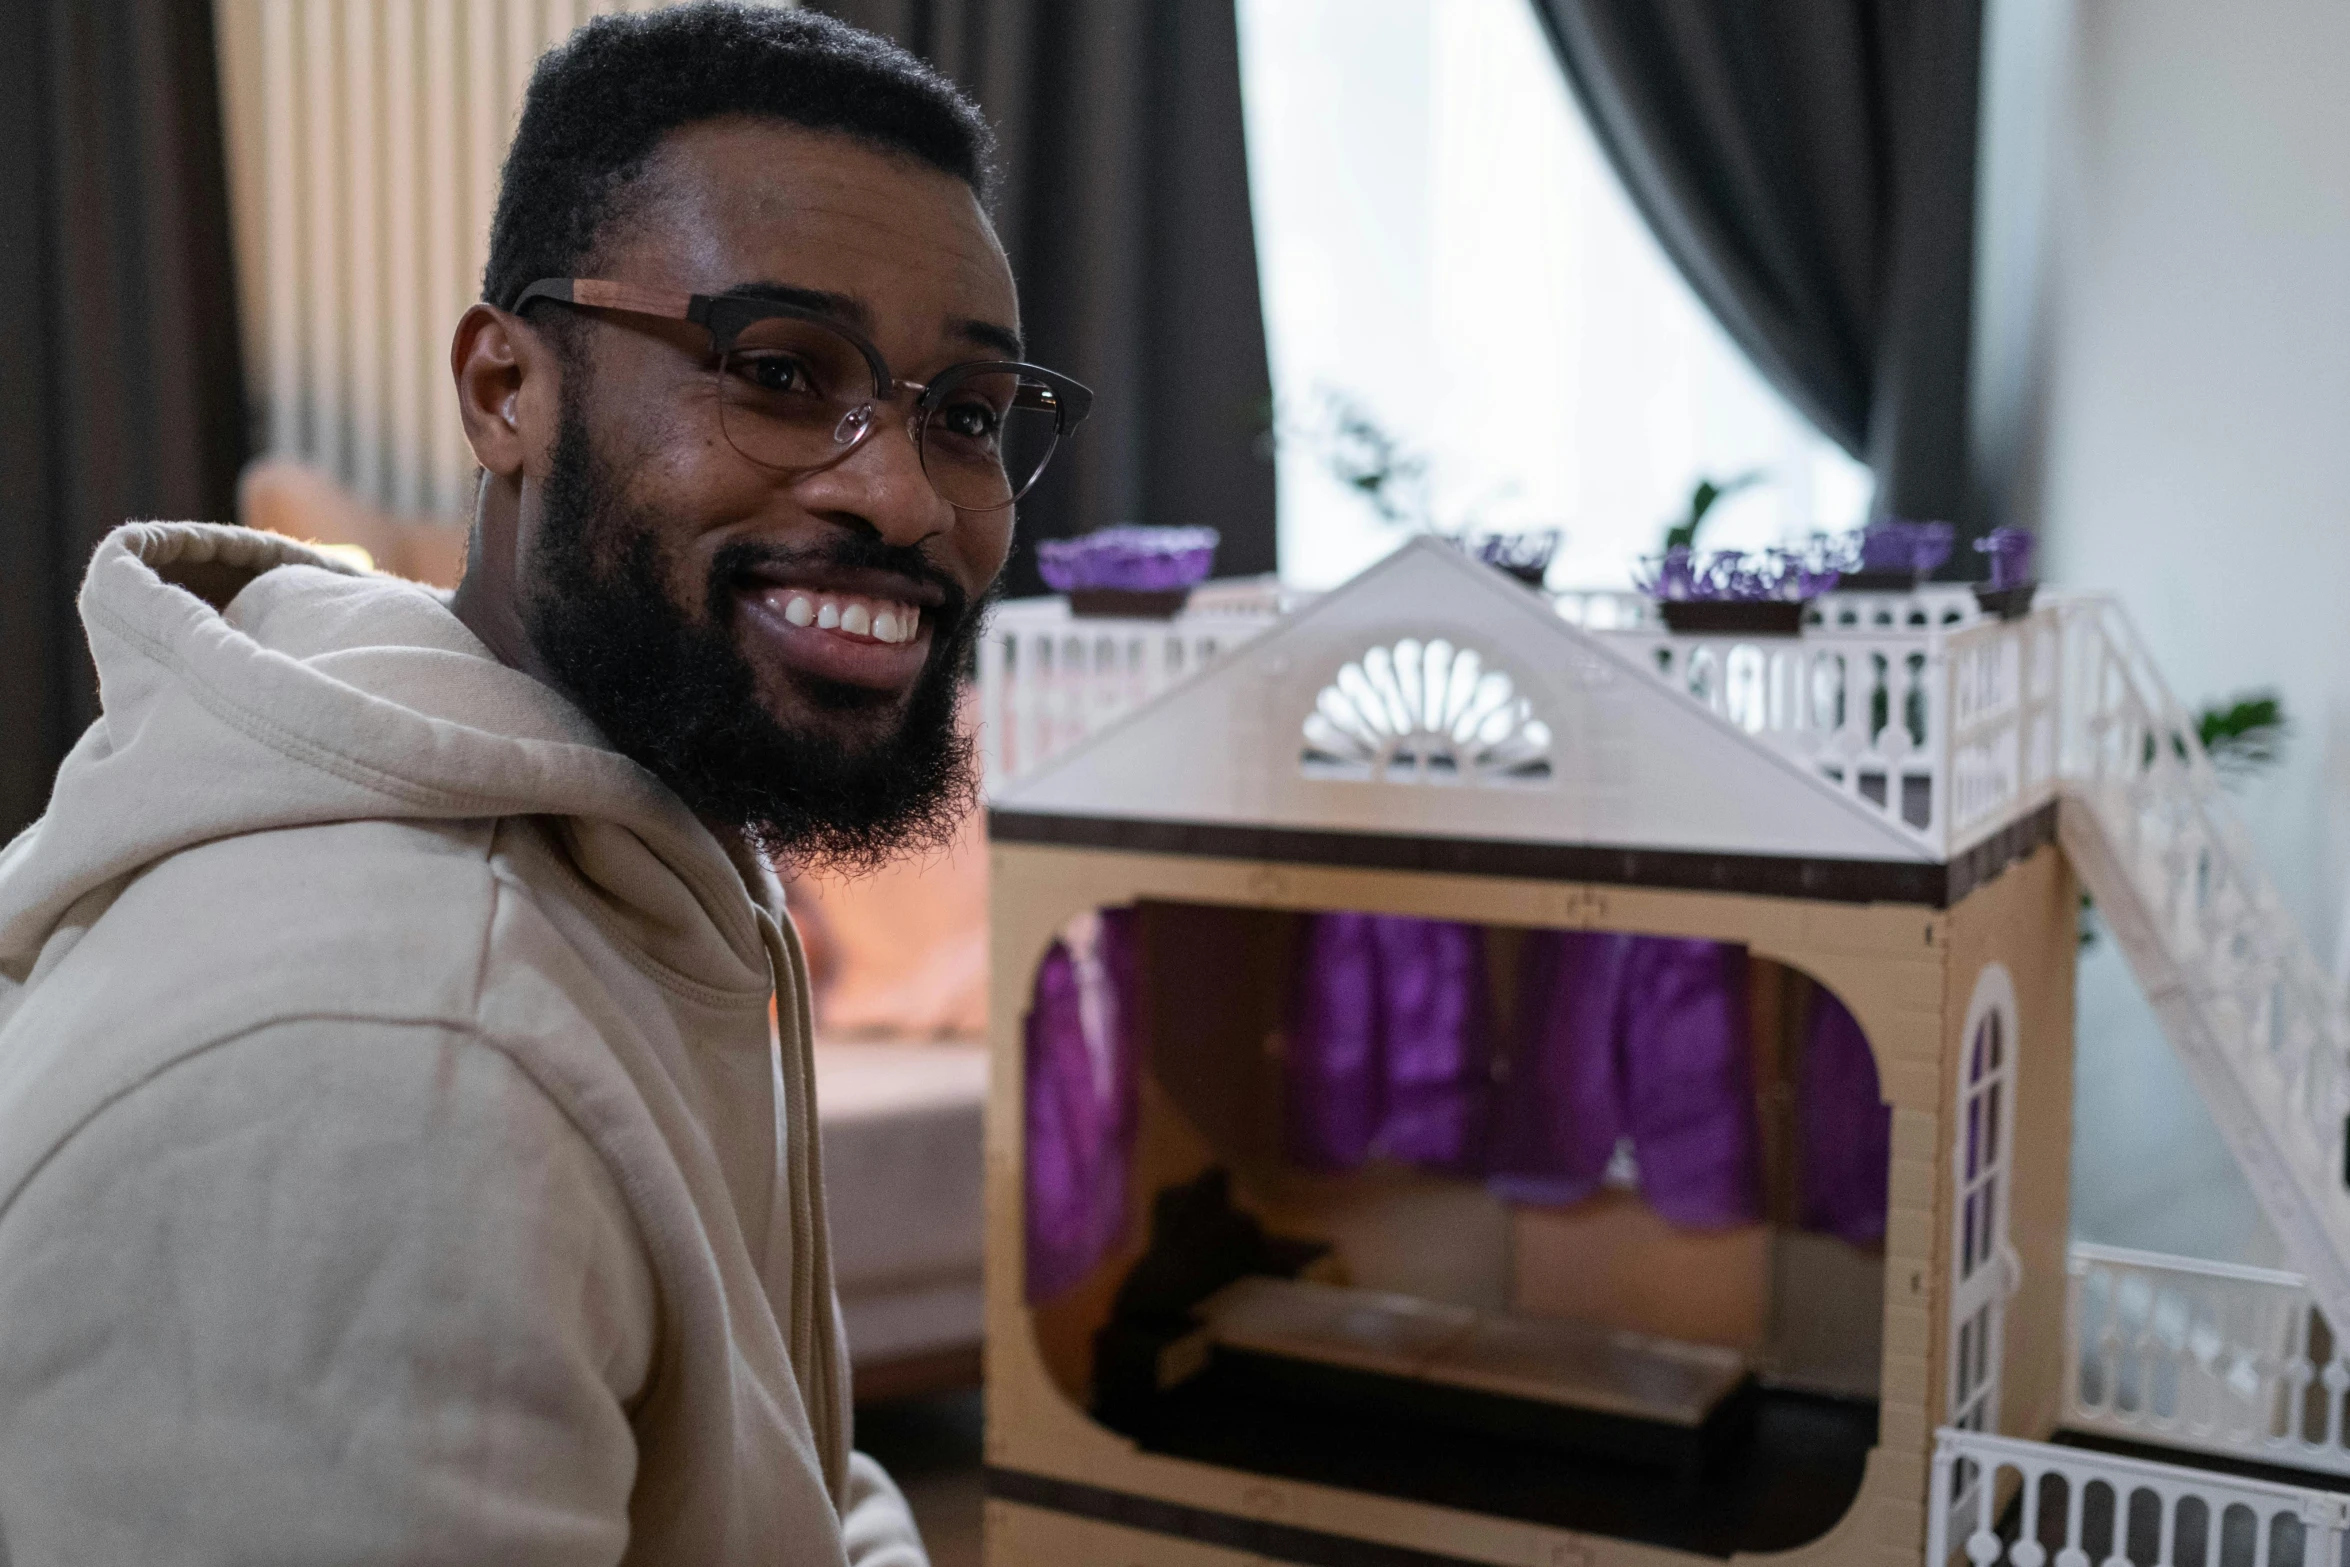 a man that is standing in front of a doll house, inspired by Frank Mason, pexels contest winner, mkbhd, smiling man, caleb from critical role, still frame from a movie